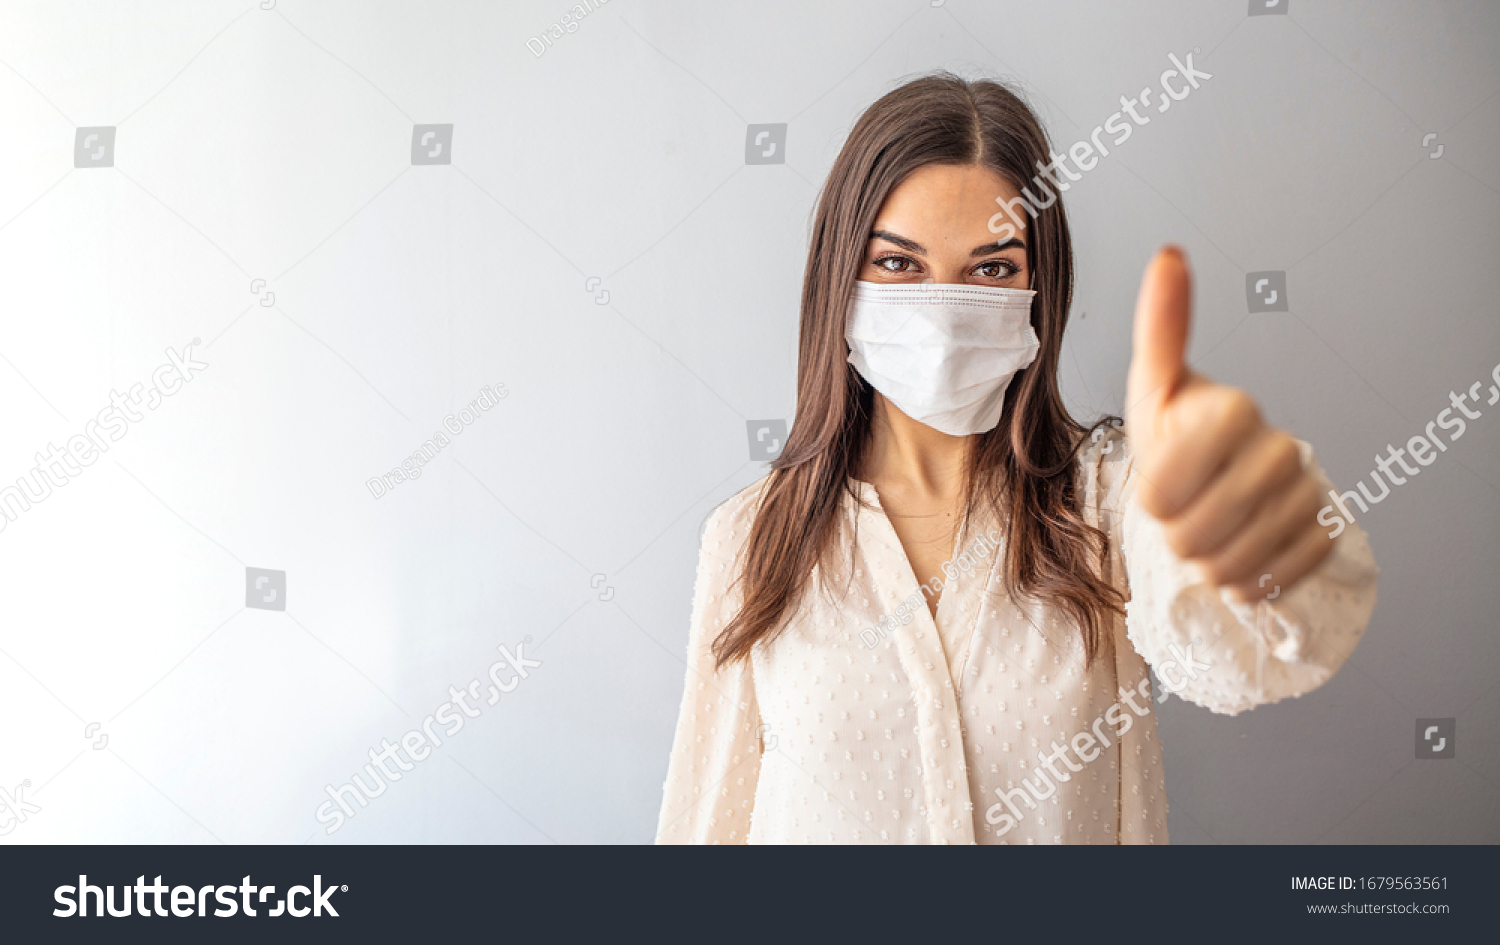 Beautiful caucasian young woman with disposable face mask. Protection versus viruses and infection. Studio portrait, concept with white background. Woman showing thumb up.  #1679563561